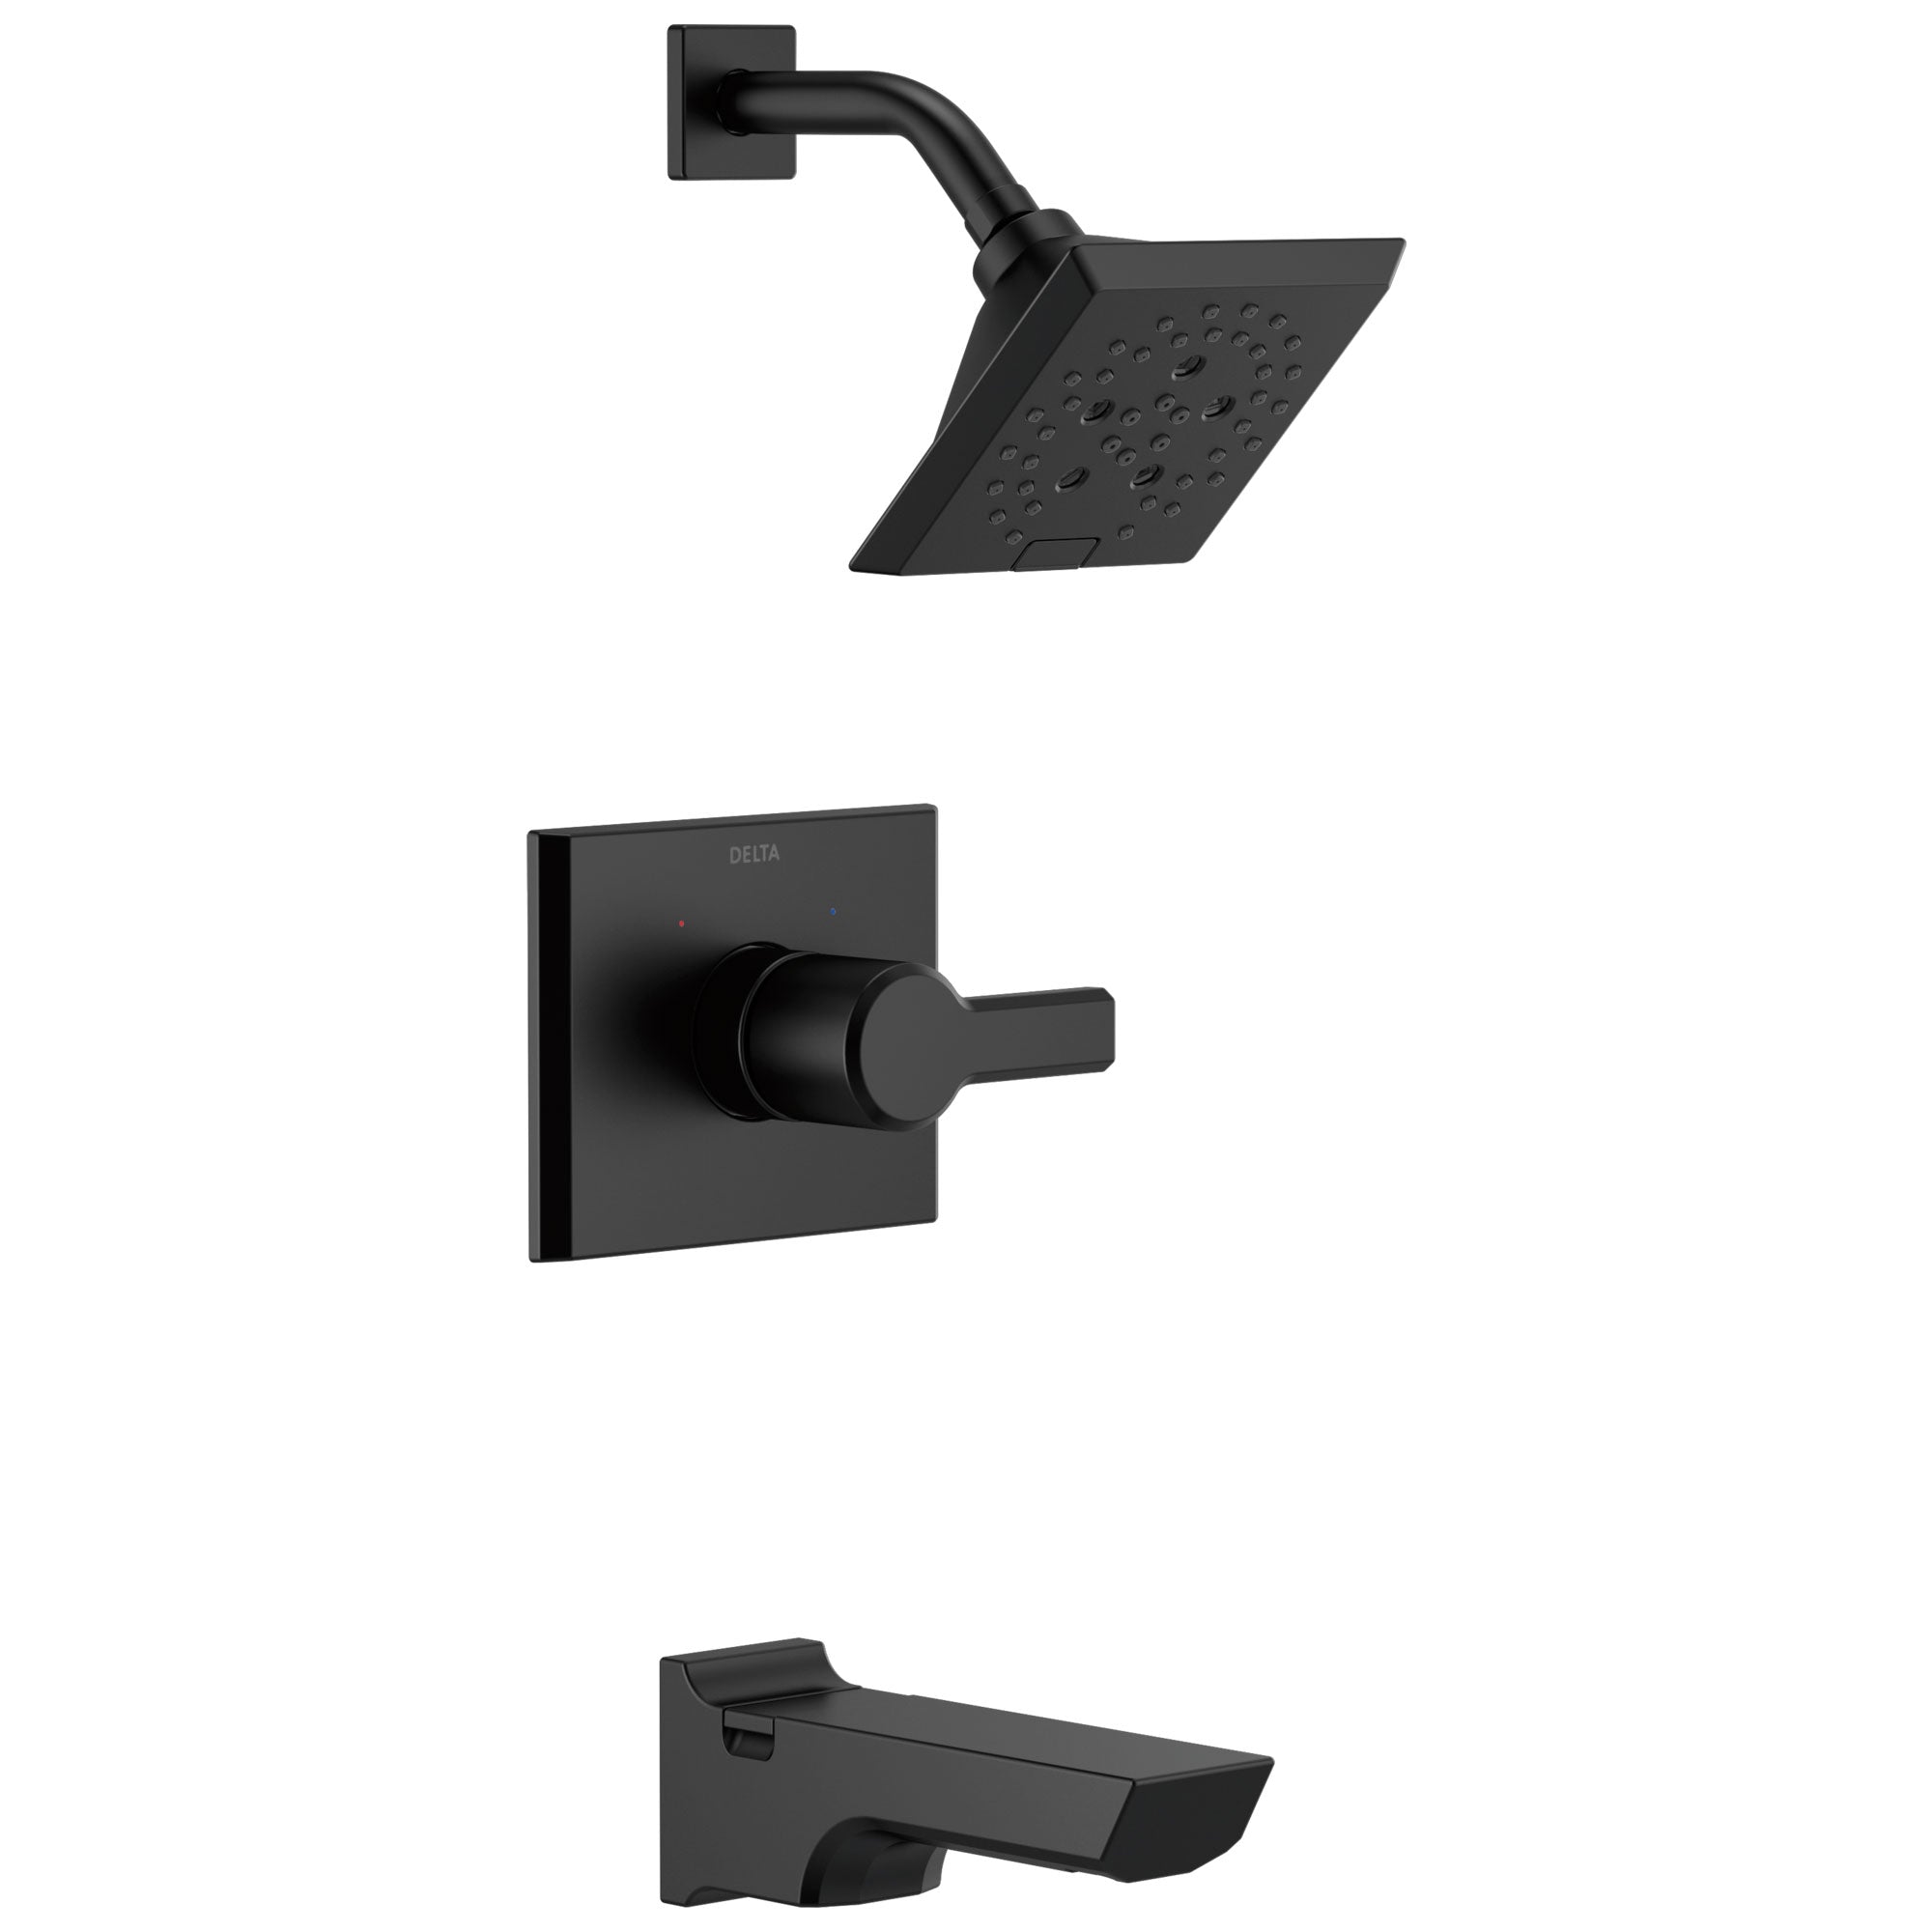 Delta Pivotal Matte Black Finish Tub and Shower Combination Faucet Includes Monitor 14 Series Cartridge, Handle, and Valve with Stops D3422V